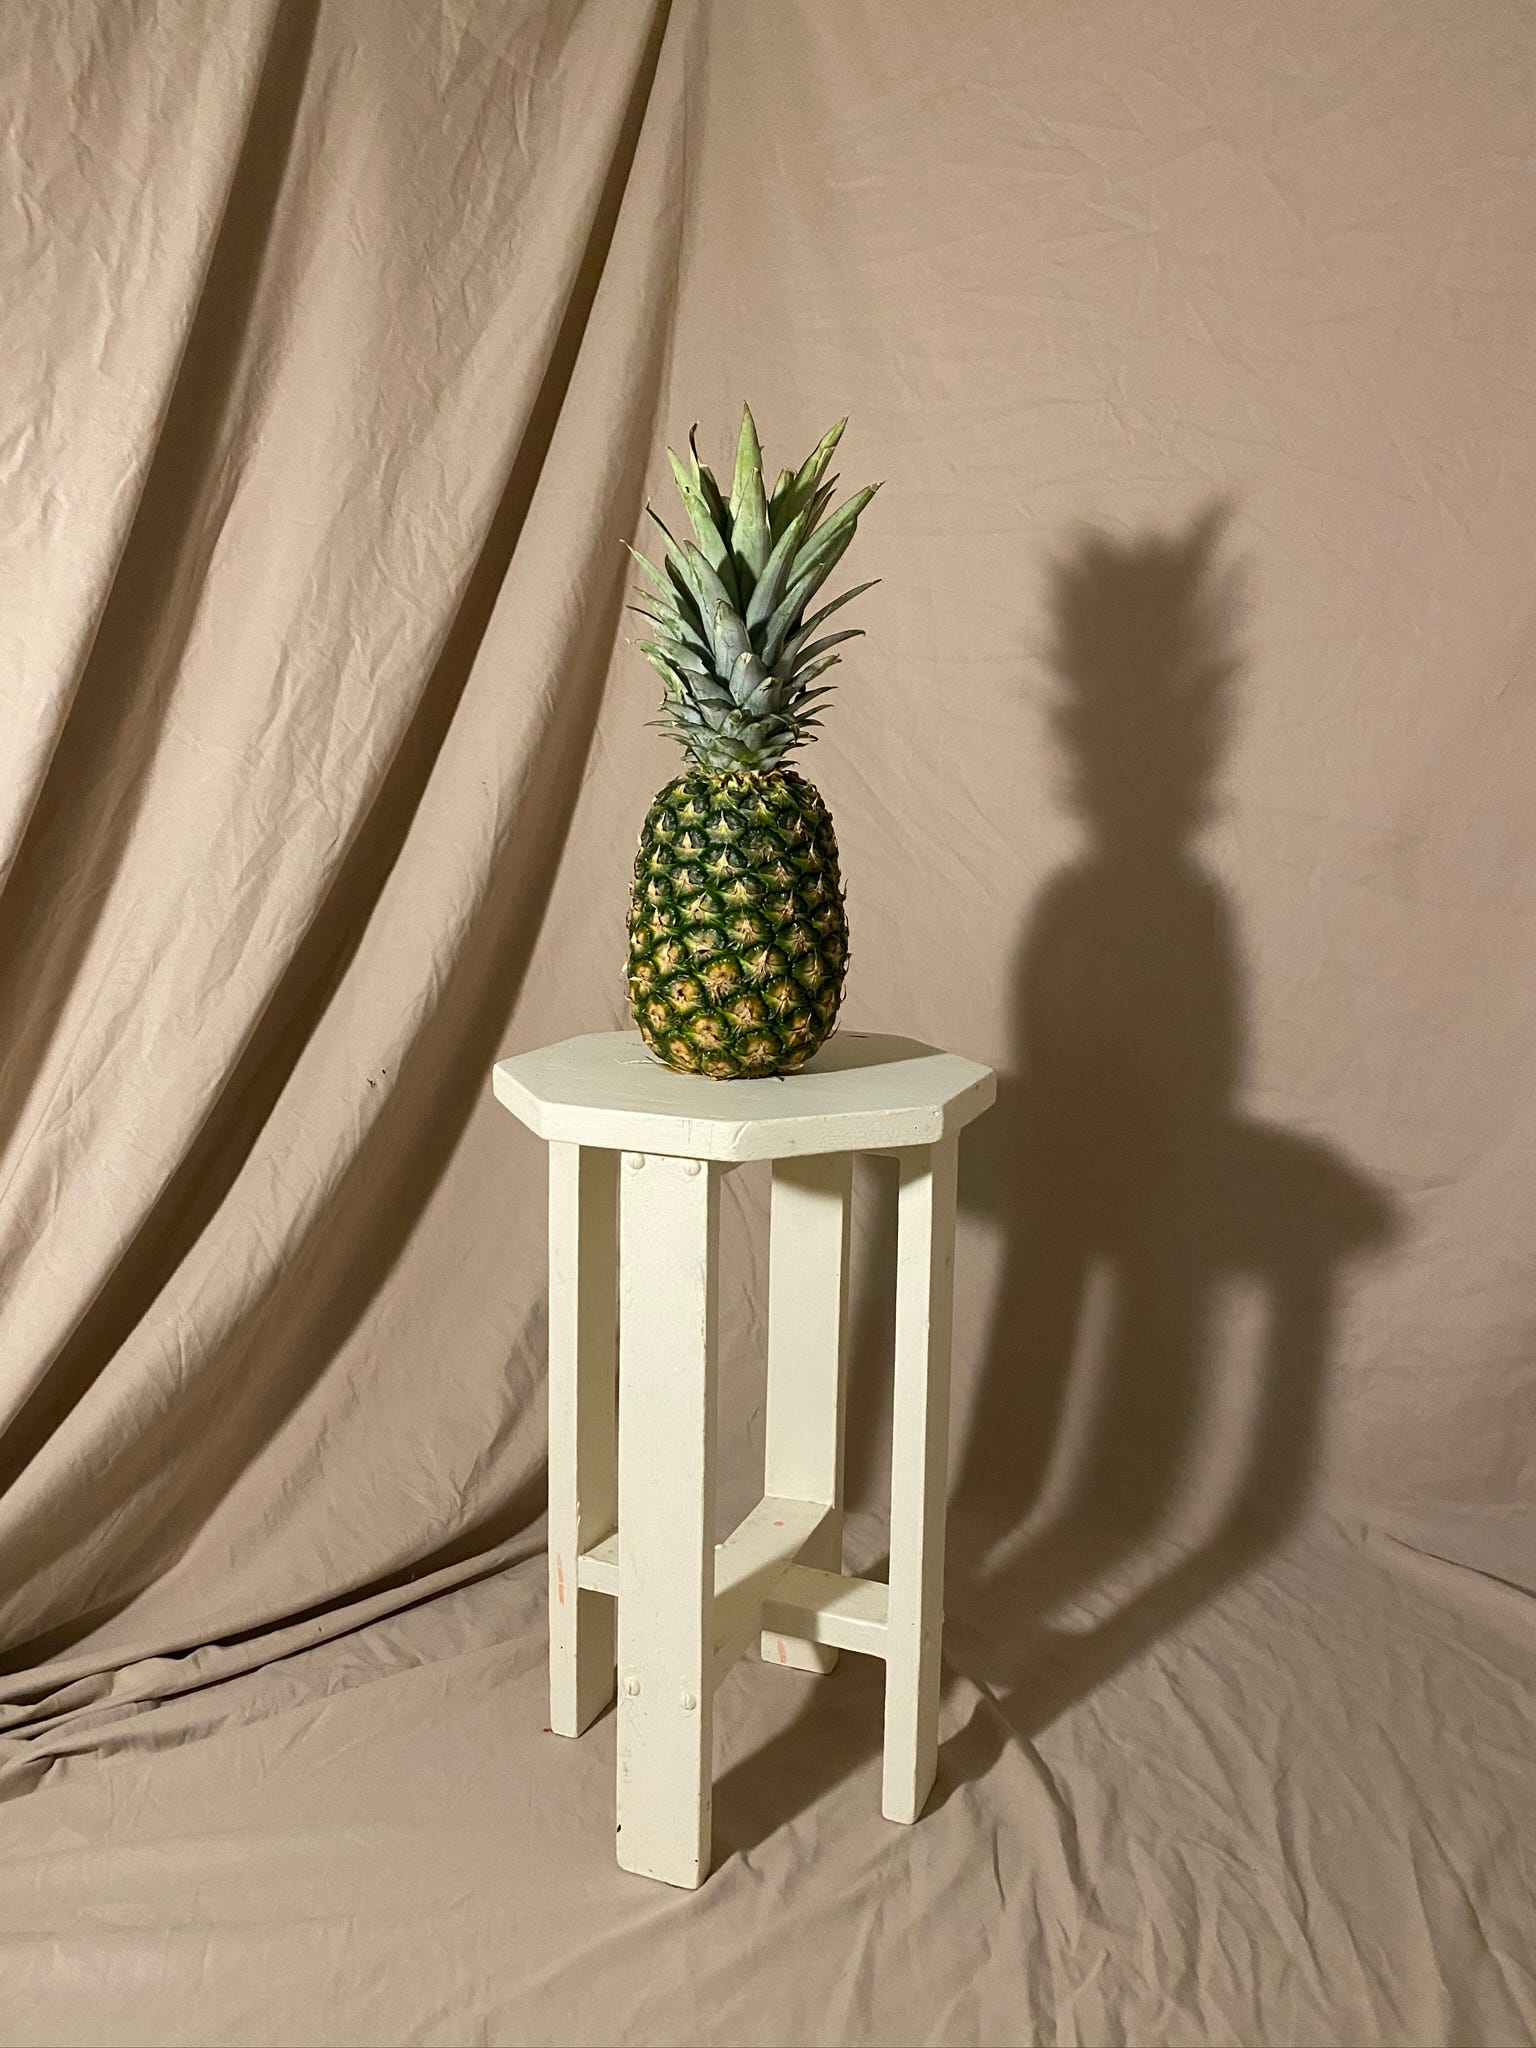 inspiration: pineapple — how could she walk there and smile, and look so